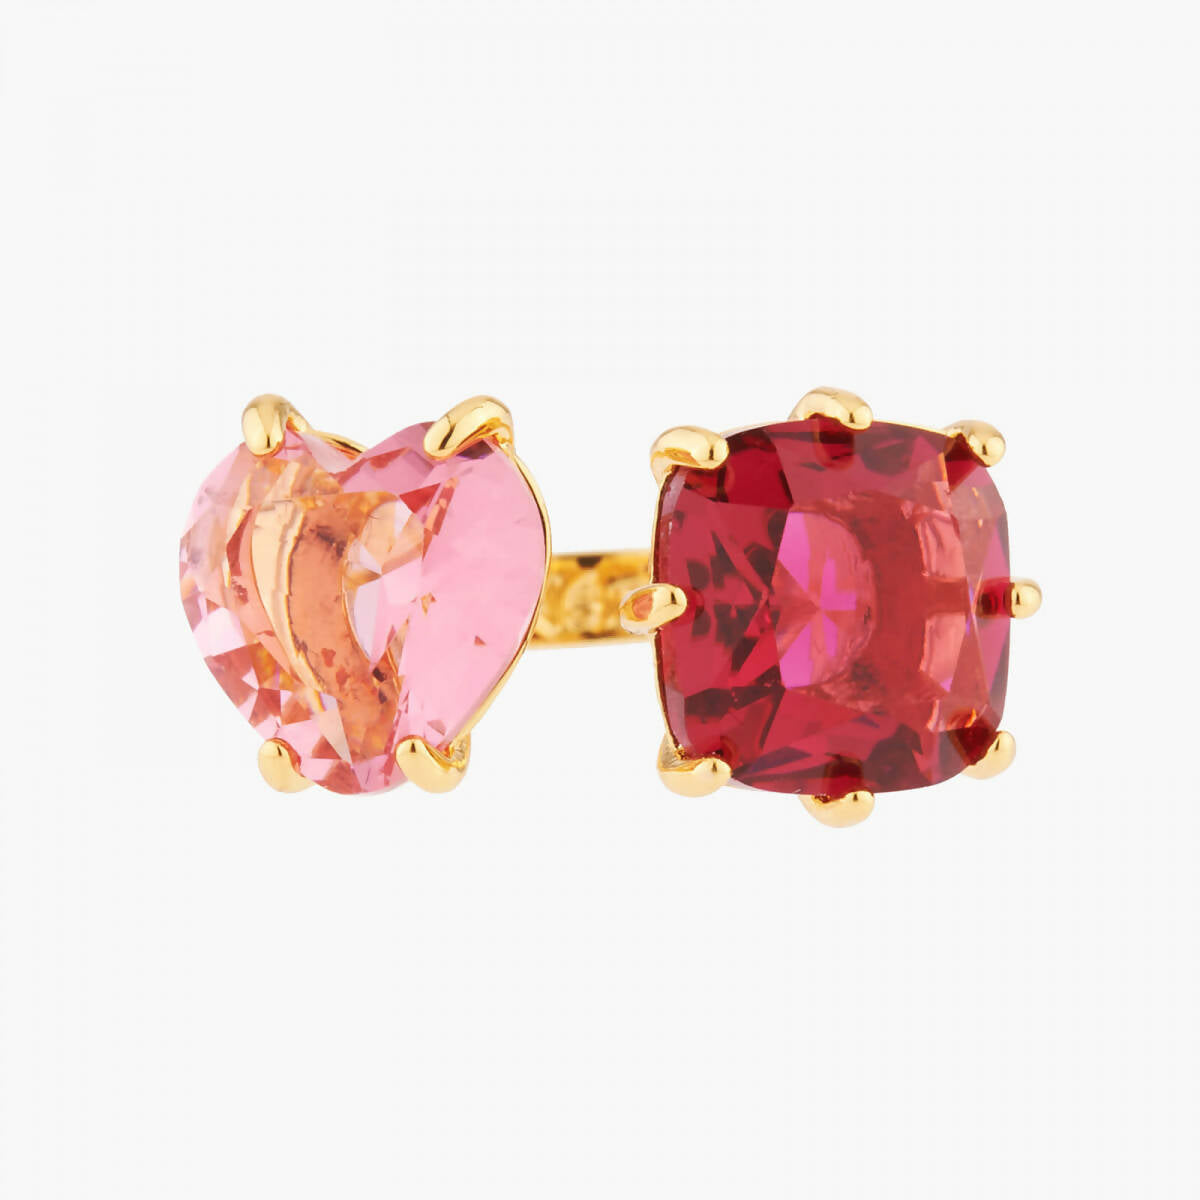 HEART SHAPED PINK PEACH AND RED SQUARE STONES LA DIAMANTINE MULTICOLOURED YOU AND I RING - Yooto